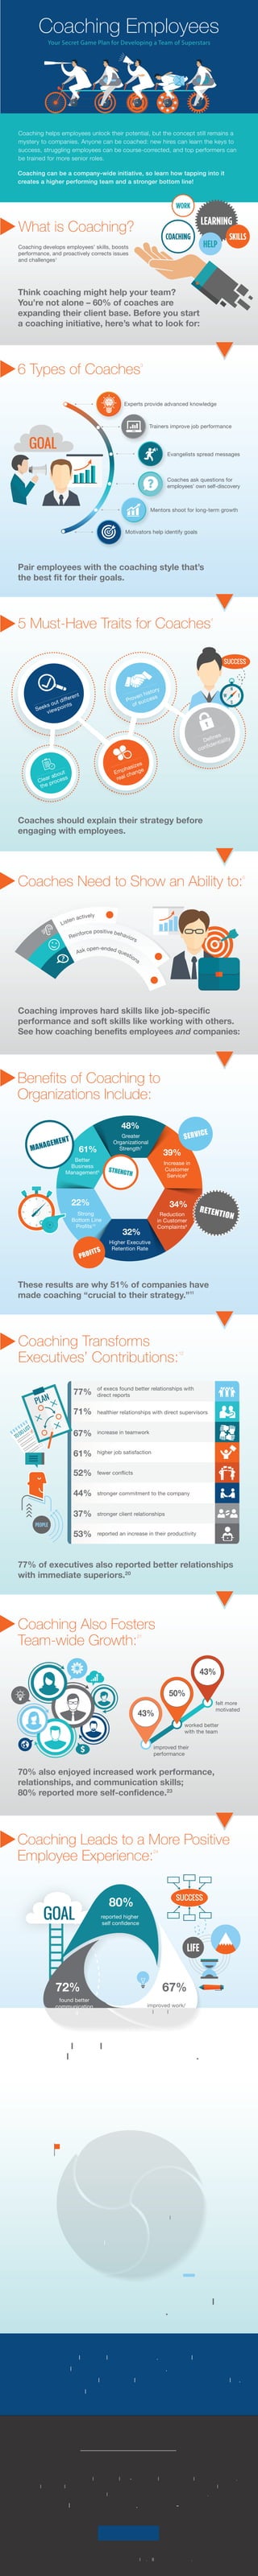 Your Secret Game Plan for Developing a Team of Superstars
Coaching Employees
Reviews of Coaching:25
Happy, repeat customers are the most powerful
endorsement of coaching’s benefits.
Coaching Leads to a More Positive
Employee Experience:24
Happier employees lead to higher retention rates,
better morale, and increases in productivity.
Coaching Also Fosters
Team-wide Growth:21
70% also enjoyed increased work performance,
relationships, and communication skills;
80% reported more self-confidence.23
77% of executives also reported better relationships
with immediate superiors.20
Benefits of Coaching to
Organizations Include:
These results are why 51% of companies have
made coaching “crucial to their strategy.”11
Coaches Need to Show an Ability to:5
Coaching improves hard skills like job-specific
performance and soft skills like working with others.
See how coaching benefits employees and companies:
5 Must-Have Traits for Coaches4
Coaching helps employees unlock their potential, but the concept still remains a
mystery to companies. Anyone can be coached: new hires can learn the keys to
success, struggling employees can be course-corrected, and top performers can
be trained for more senior roles.
Coaching can be a company-wide initiative, so learn how tapping into it
creates a higher performing team and a stronger bottom line!
What is Coaching?
6 Types of Coaches3
Experts provide advanced knowledge
Trainers improve job performance
Evangelists spread messages
Coaches ask questions for
employees’ own self-discovery
Mentors shoot for long-term growth
Motivators help identify goals
Pair employees with the coaching style that’s
the best fit for their goals.
Coaches should explain their strategy before
engaging with employees.
Clear about
the process
Seeks out different
viewpoints
Emphasizes
real change
Proven history
of success
Defines
confidentiality
Think coaching might help your team?
You’re not alone – 60% of coaches are
expanding their client base. Before you start
a coaching initiative, here’s what to look for:
Coaching develops employees’ skills, boosts
performance, and proactively corrects issues
and challenges1
Listen actively
Reinforce positive behaviors
Ask open-ended questions
61%
Better
Business
Management6
48%
Greater
Organizational
Strength7
39%
Increase in
Customer
Service8
34%
Reduction
in Customer
Complaints9
22%
Strong
Bottom Line
Profits10
32%
Higher Executive
Retention Rate
MANAGEMENT
STRENGTH
SERVICE
RETENTION
PROFITS
of execs found better relationships with
direct reports
healthier relationships with direct supervisors
increase in teamwork
higher job satisfaction
fewer conflicts
stronger commitment to the company
stronger client relationships
reported an increase in their productivity
77%
71%
67%
61%
52%
44%
37%
53%
felt more
motivated
43%
50%
43%
worked better
with the team
improved their
performance
80%
72% 67%
reported higher
self confidence
found better
communication
skills
improved work/
life balance
99%
are “somewhat” or “very
satisfied” with the
experience
96%
would repeat
the process
86%
of companies
feel they
recouped their
investment
Cornerstone OnDemand is a leader in cloud-based applications for talent management.
Our solutions help organizations recruit, train, manage and connect their employees,
empowering their people and increasing workforce productivity.
To learn more, visit csod.com/growth-editioncsod.com/growth-edition
SOURCES
© 2015 Cornerstone OnDemand, Inc. All Rights Reserved.
Coaching is a game plan for building a great team. Match employees with
a coach whose style can best guide them to success. Benefits range from
increased productivity to healthier work relationships and a stronger bottom line.
So open the coaching playbook and transform your company today!
Coaching Transforms
Executives’ Contributions:12
 